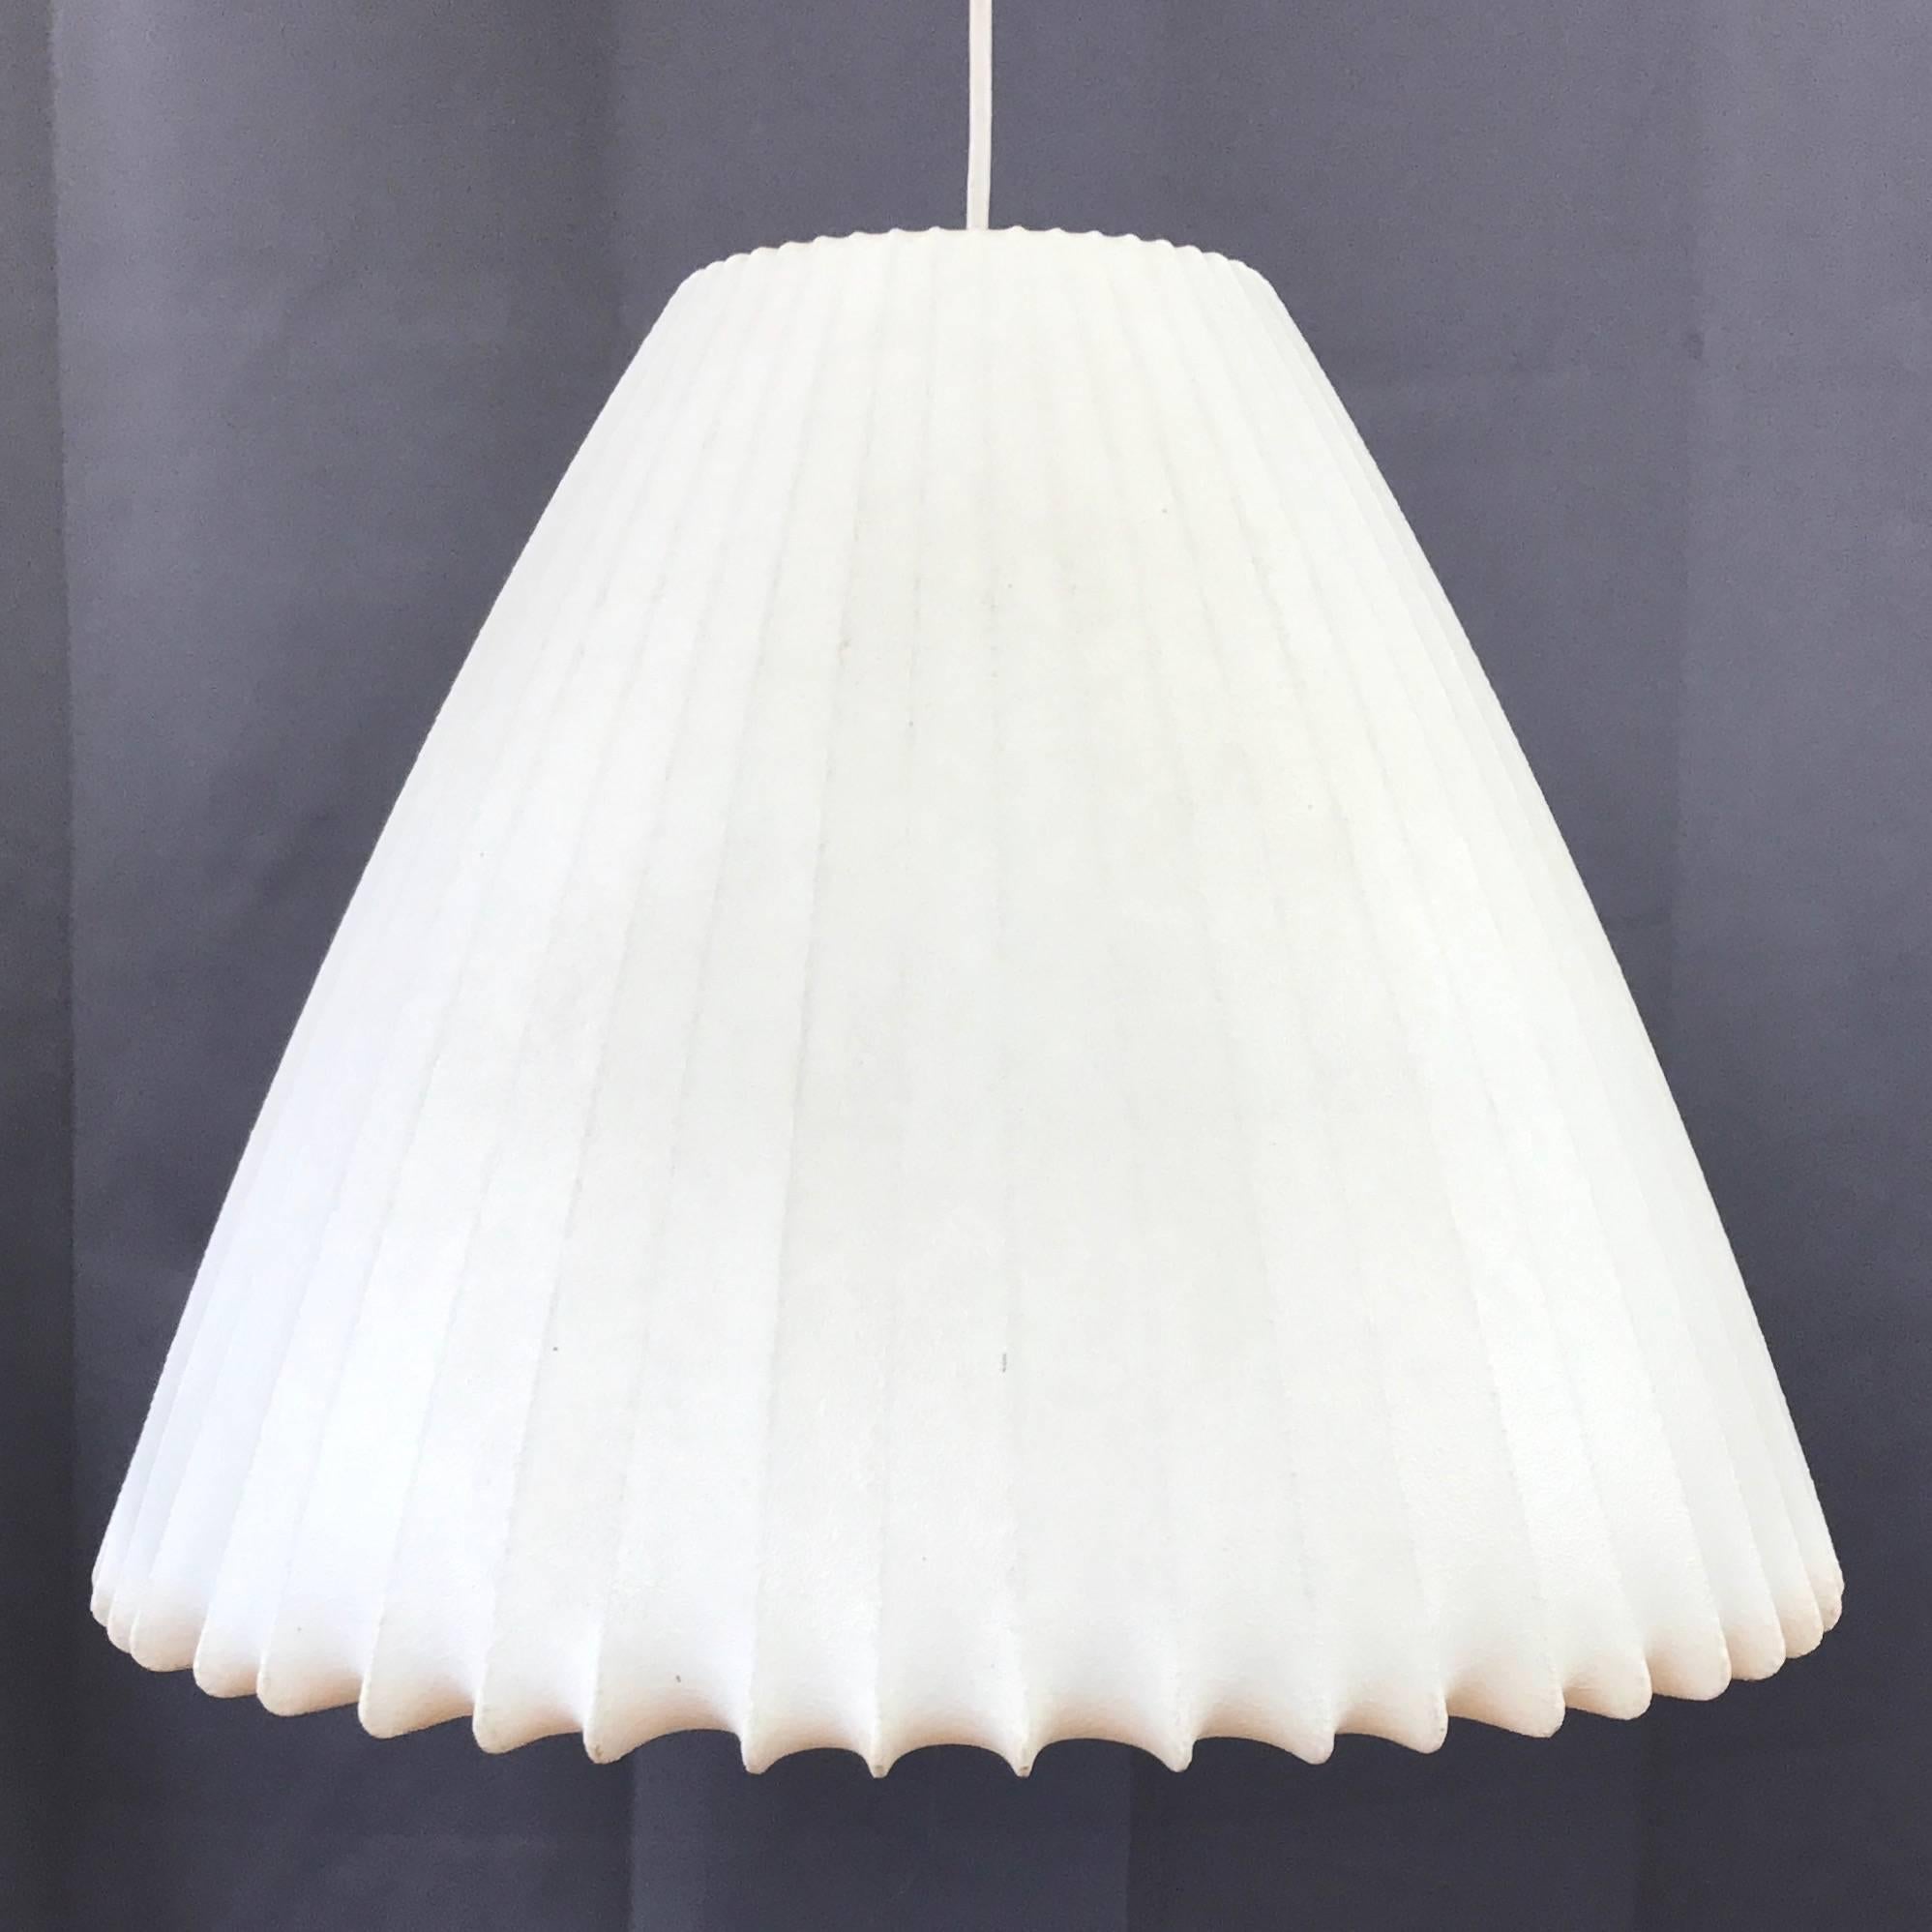 A very rare vintage bell-shaped hanging Bubble Lamp by George Nelson for the Howard Miller Clock Company.

Designed in 1952, its shape and size are of a scarce combination that sets it apart from the myriad other more common original and